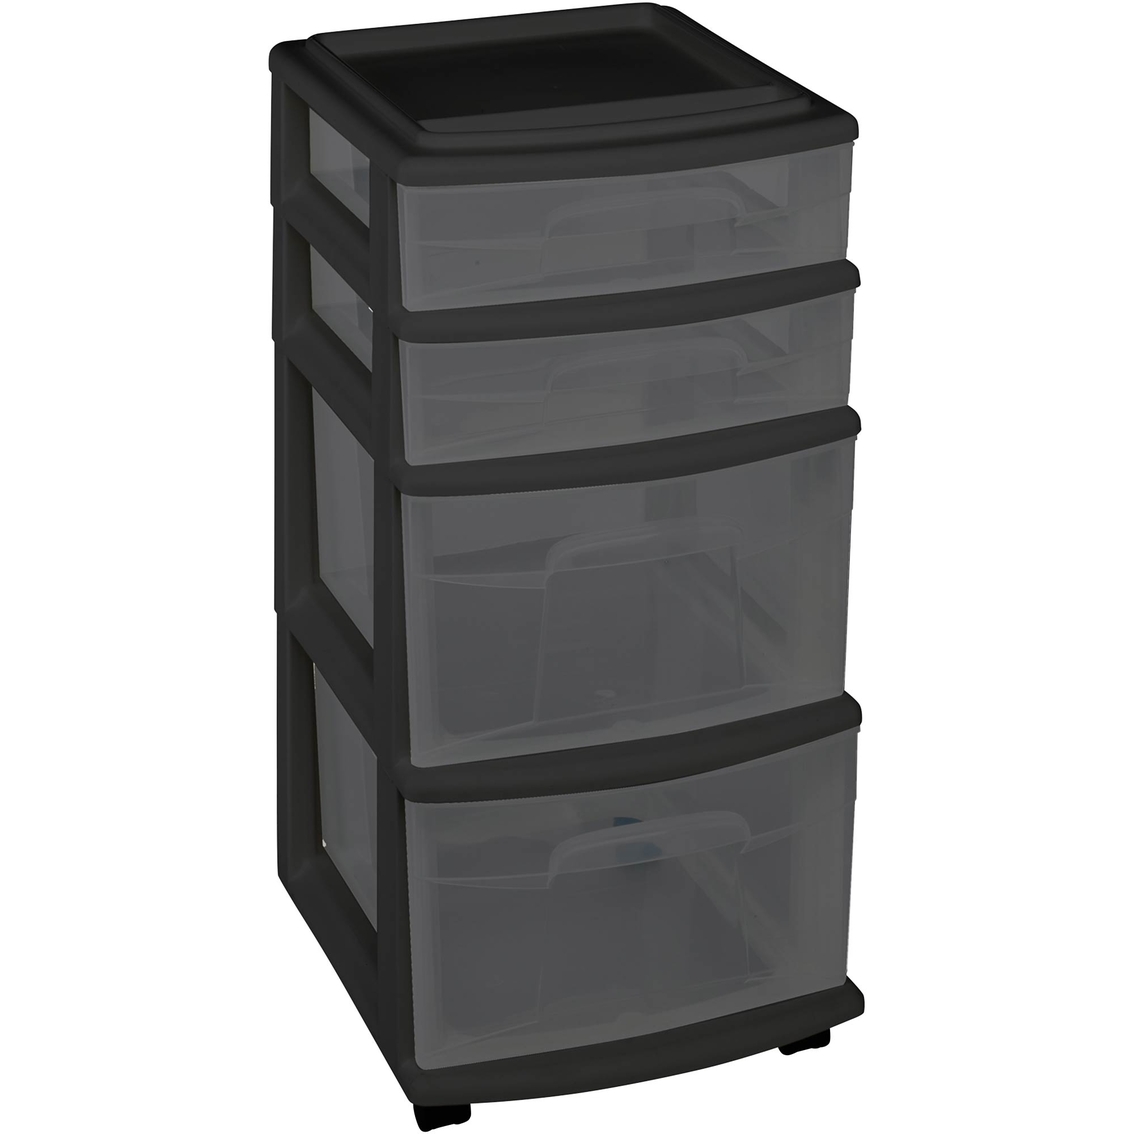 Casters Included Black Frame/Clear Drawers & Plastic 4 Drawer Medium Cart Black Frame with Smoke Tint Drawers Set of 1 Homz 4 Storage Cart Set of 1 